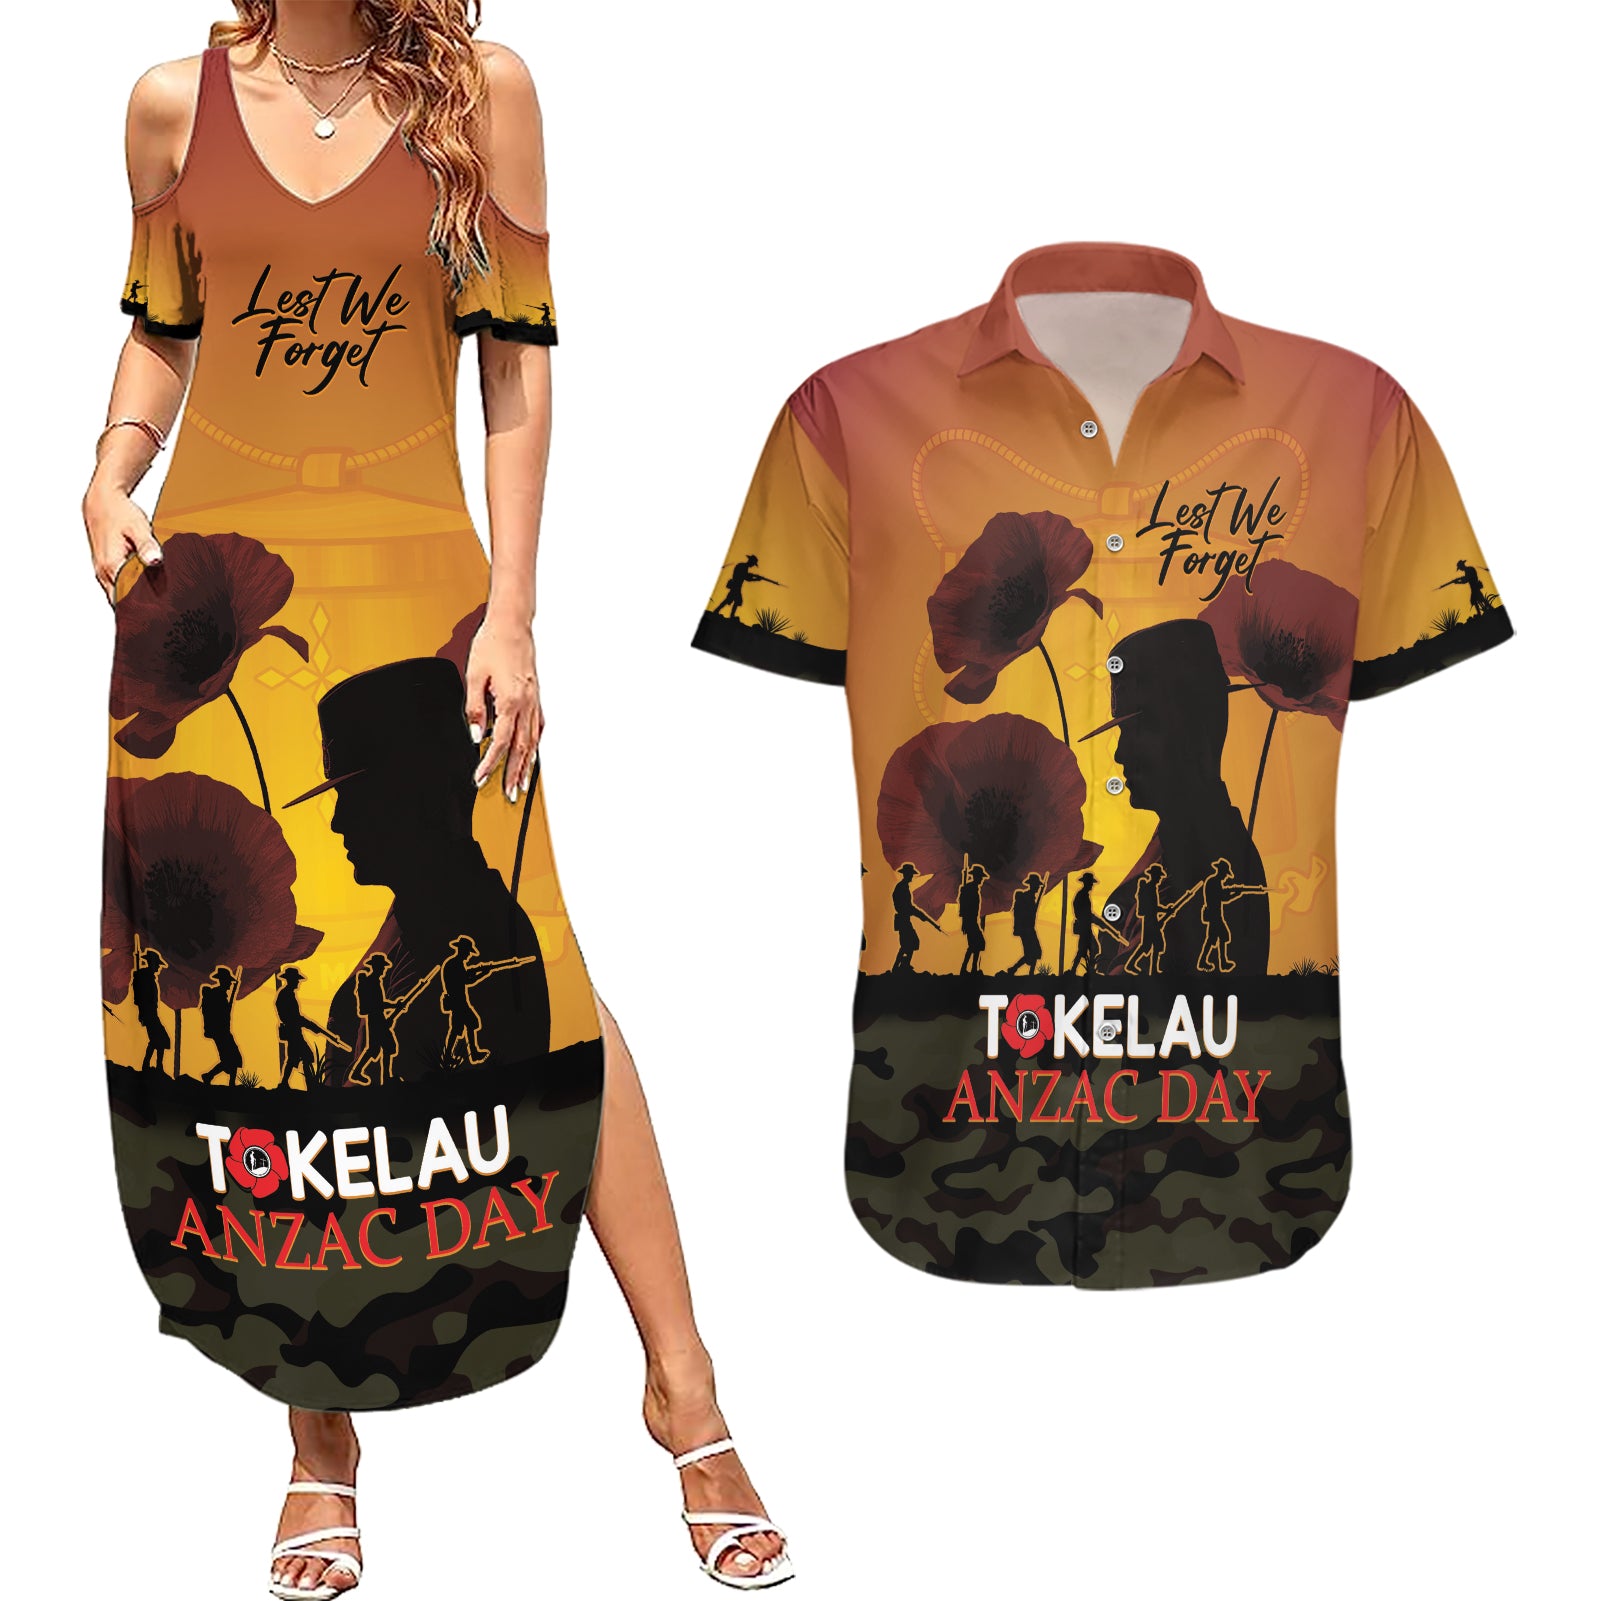 Tokelau ANZAC Day Couples Matching Summer Maxi Dress and Hawaiian Shirt Camouflage With Poppies Lest We Forget LT14 Yellow - Polynesian Pride